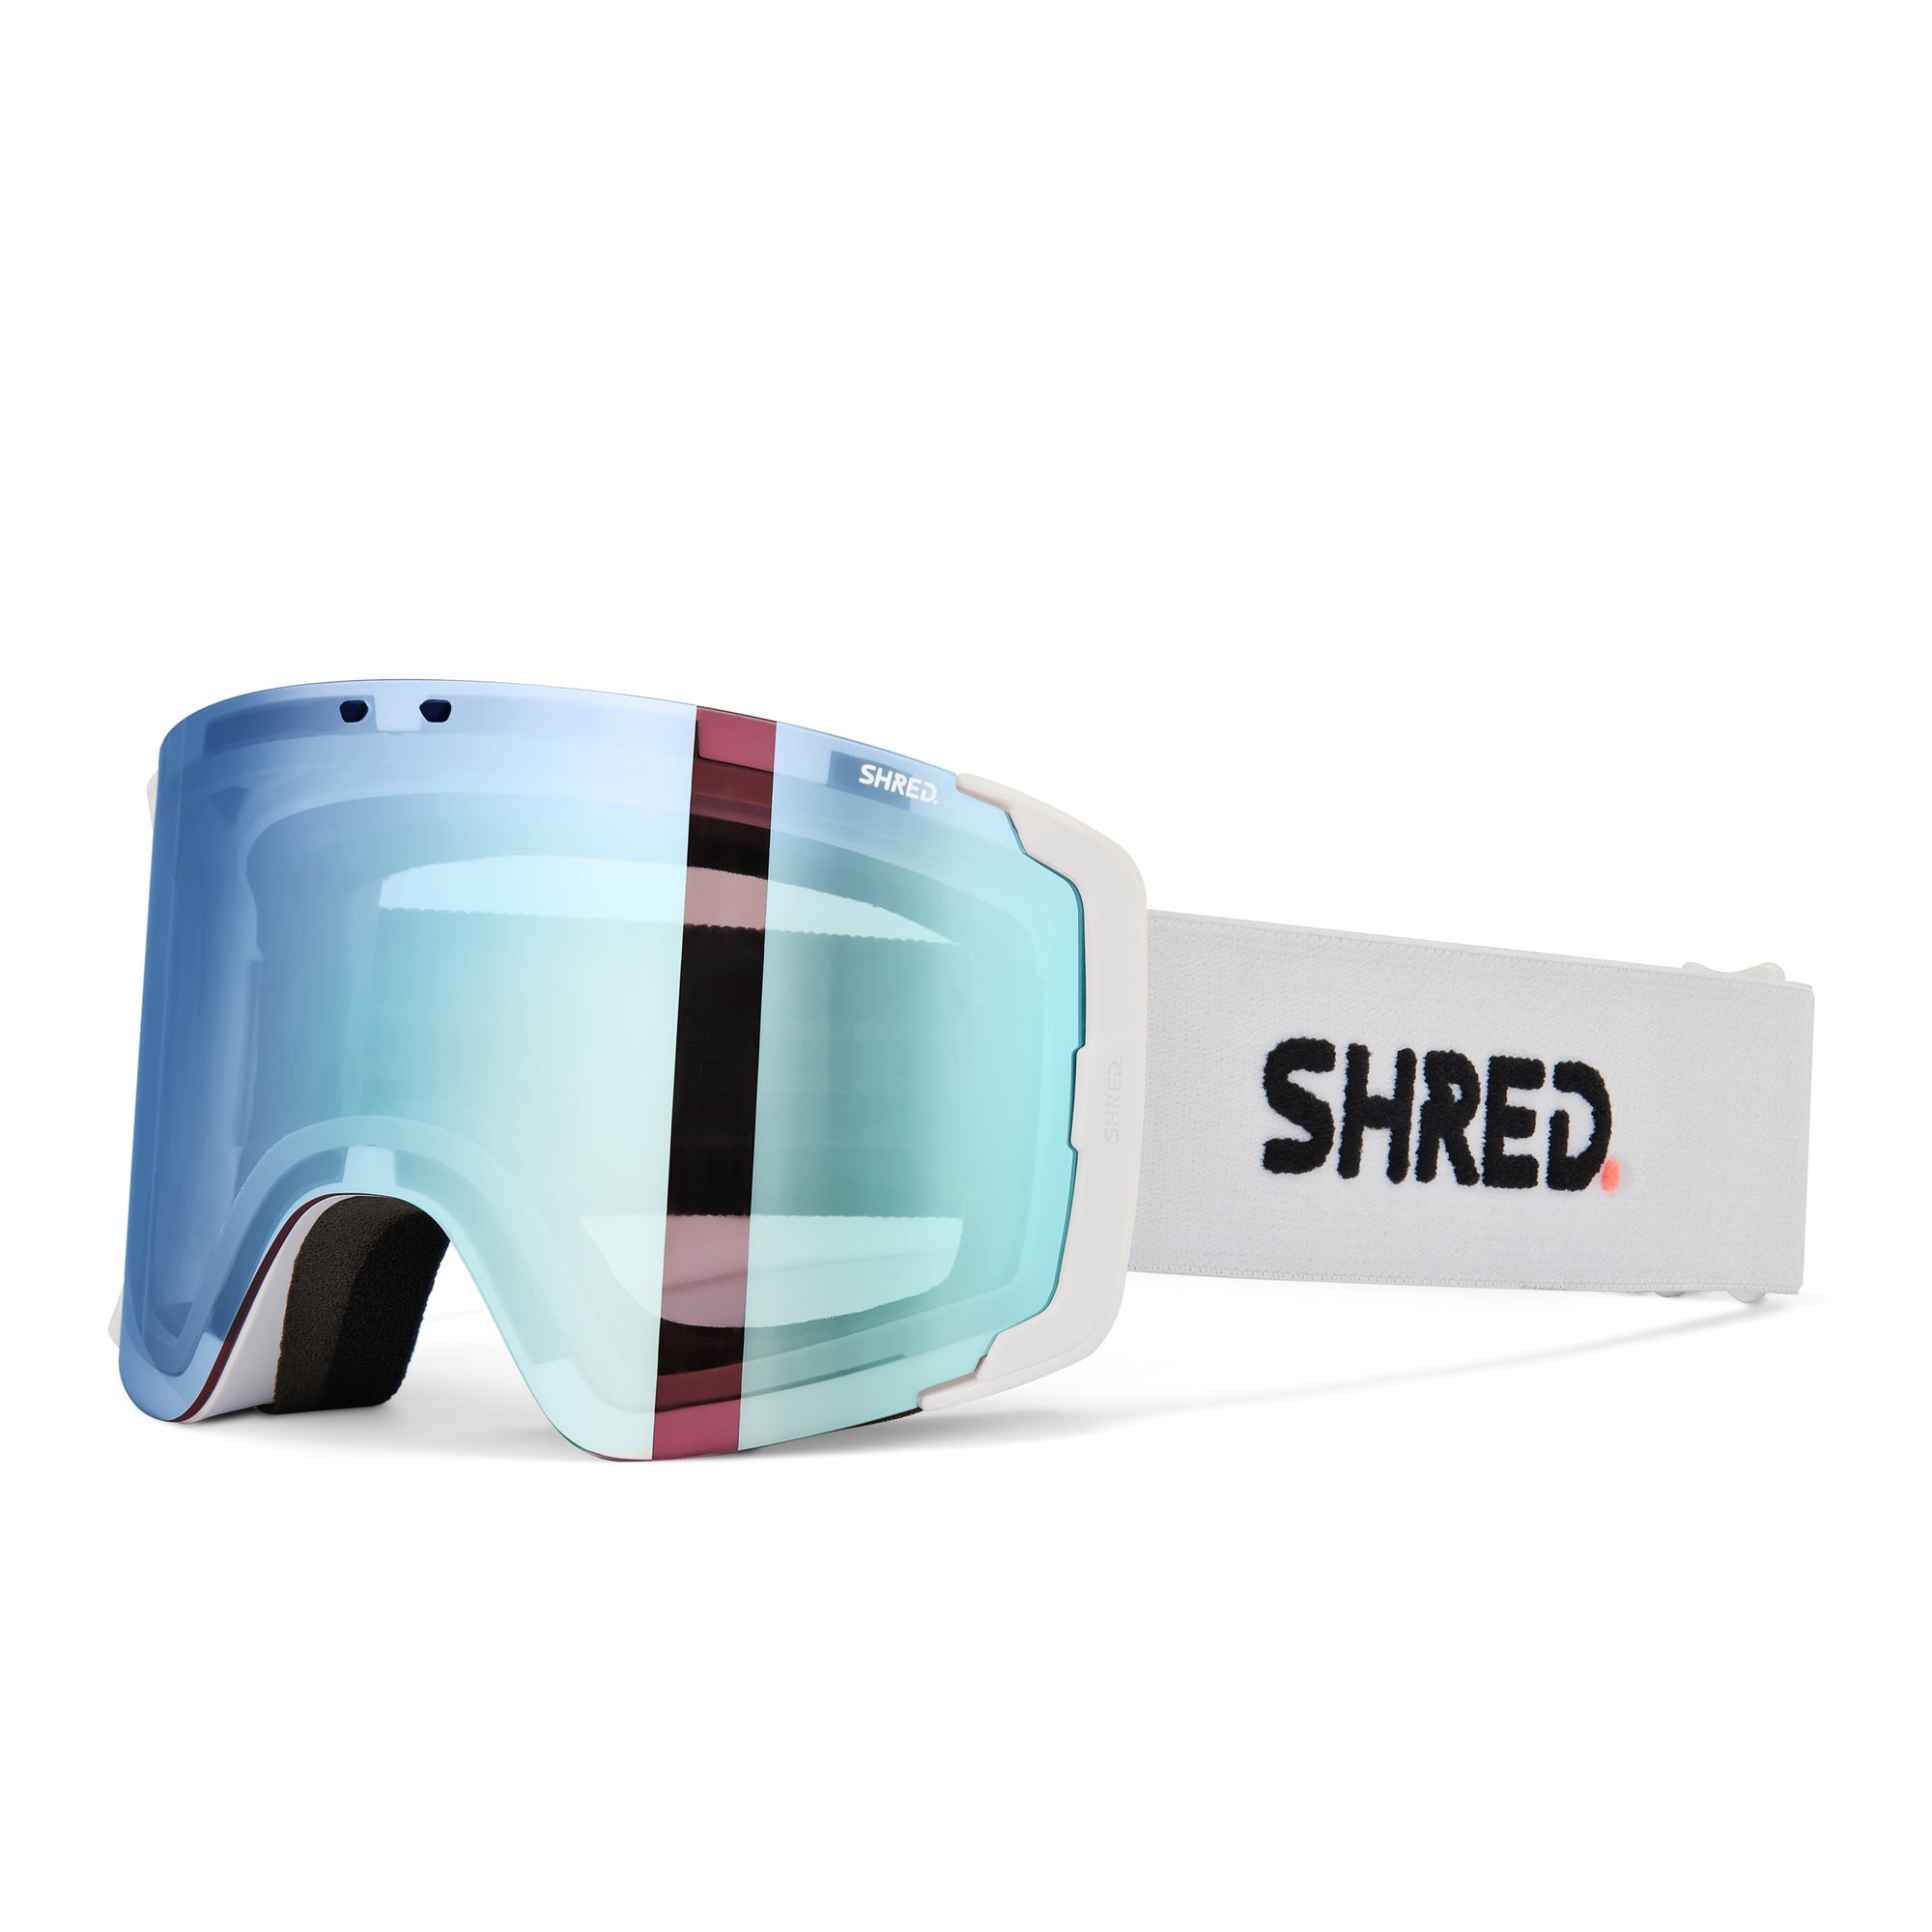 OUR BEST SELLING GOGGLES